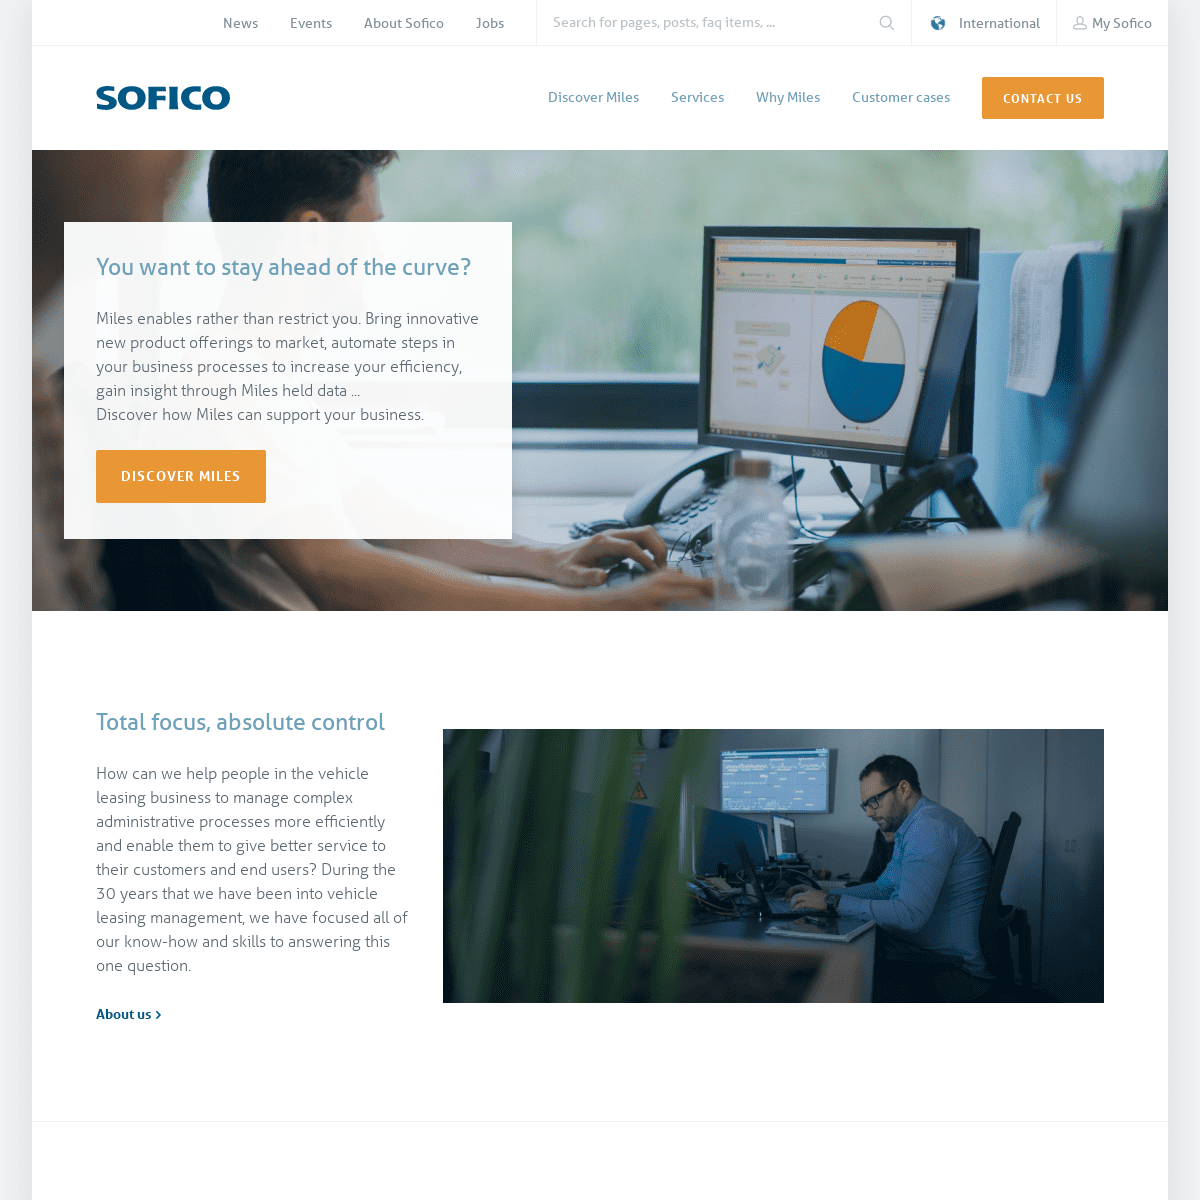 Software for automotive leasing, financing and mobility management - Sofico